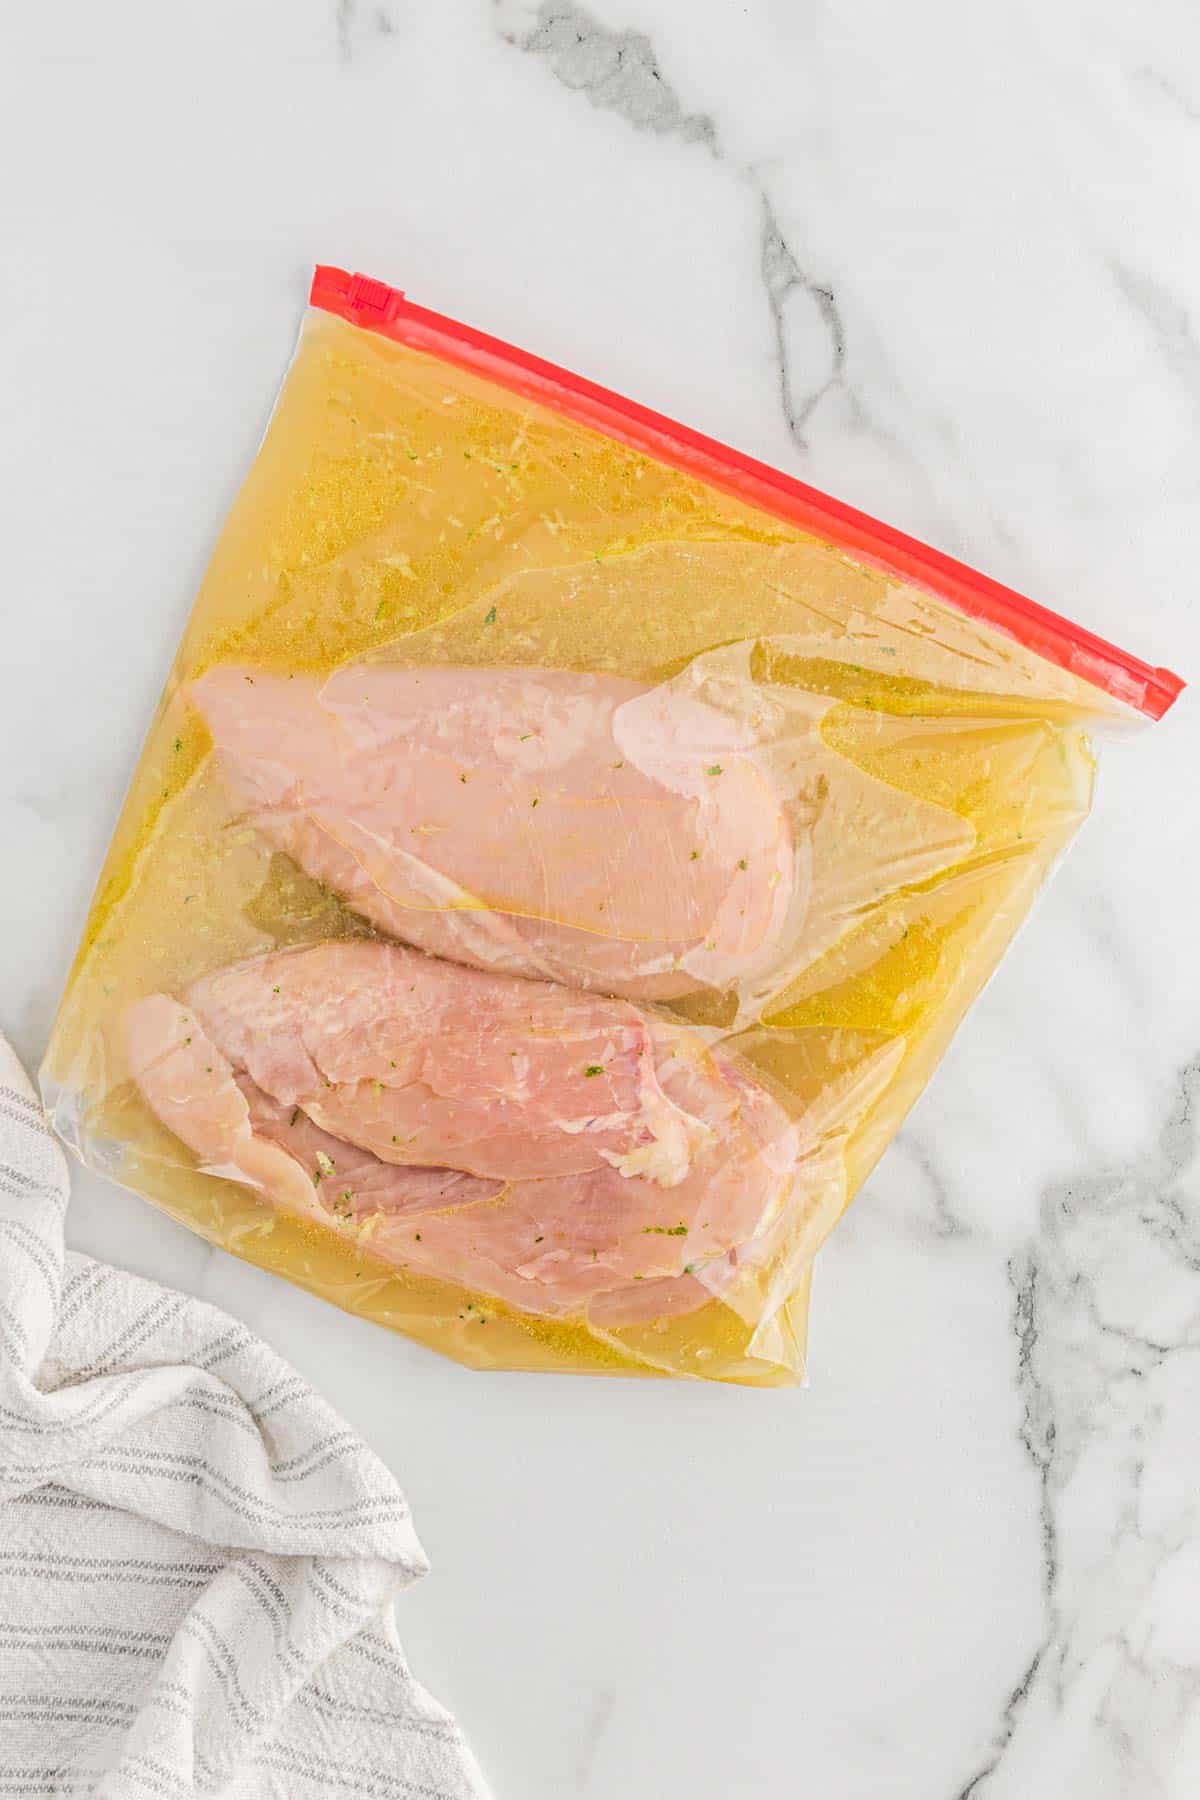 Chicken breasts and marinade in a plastic bag.